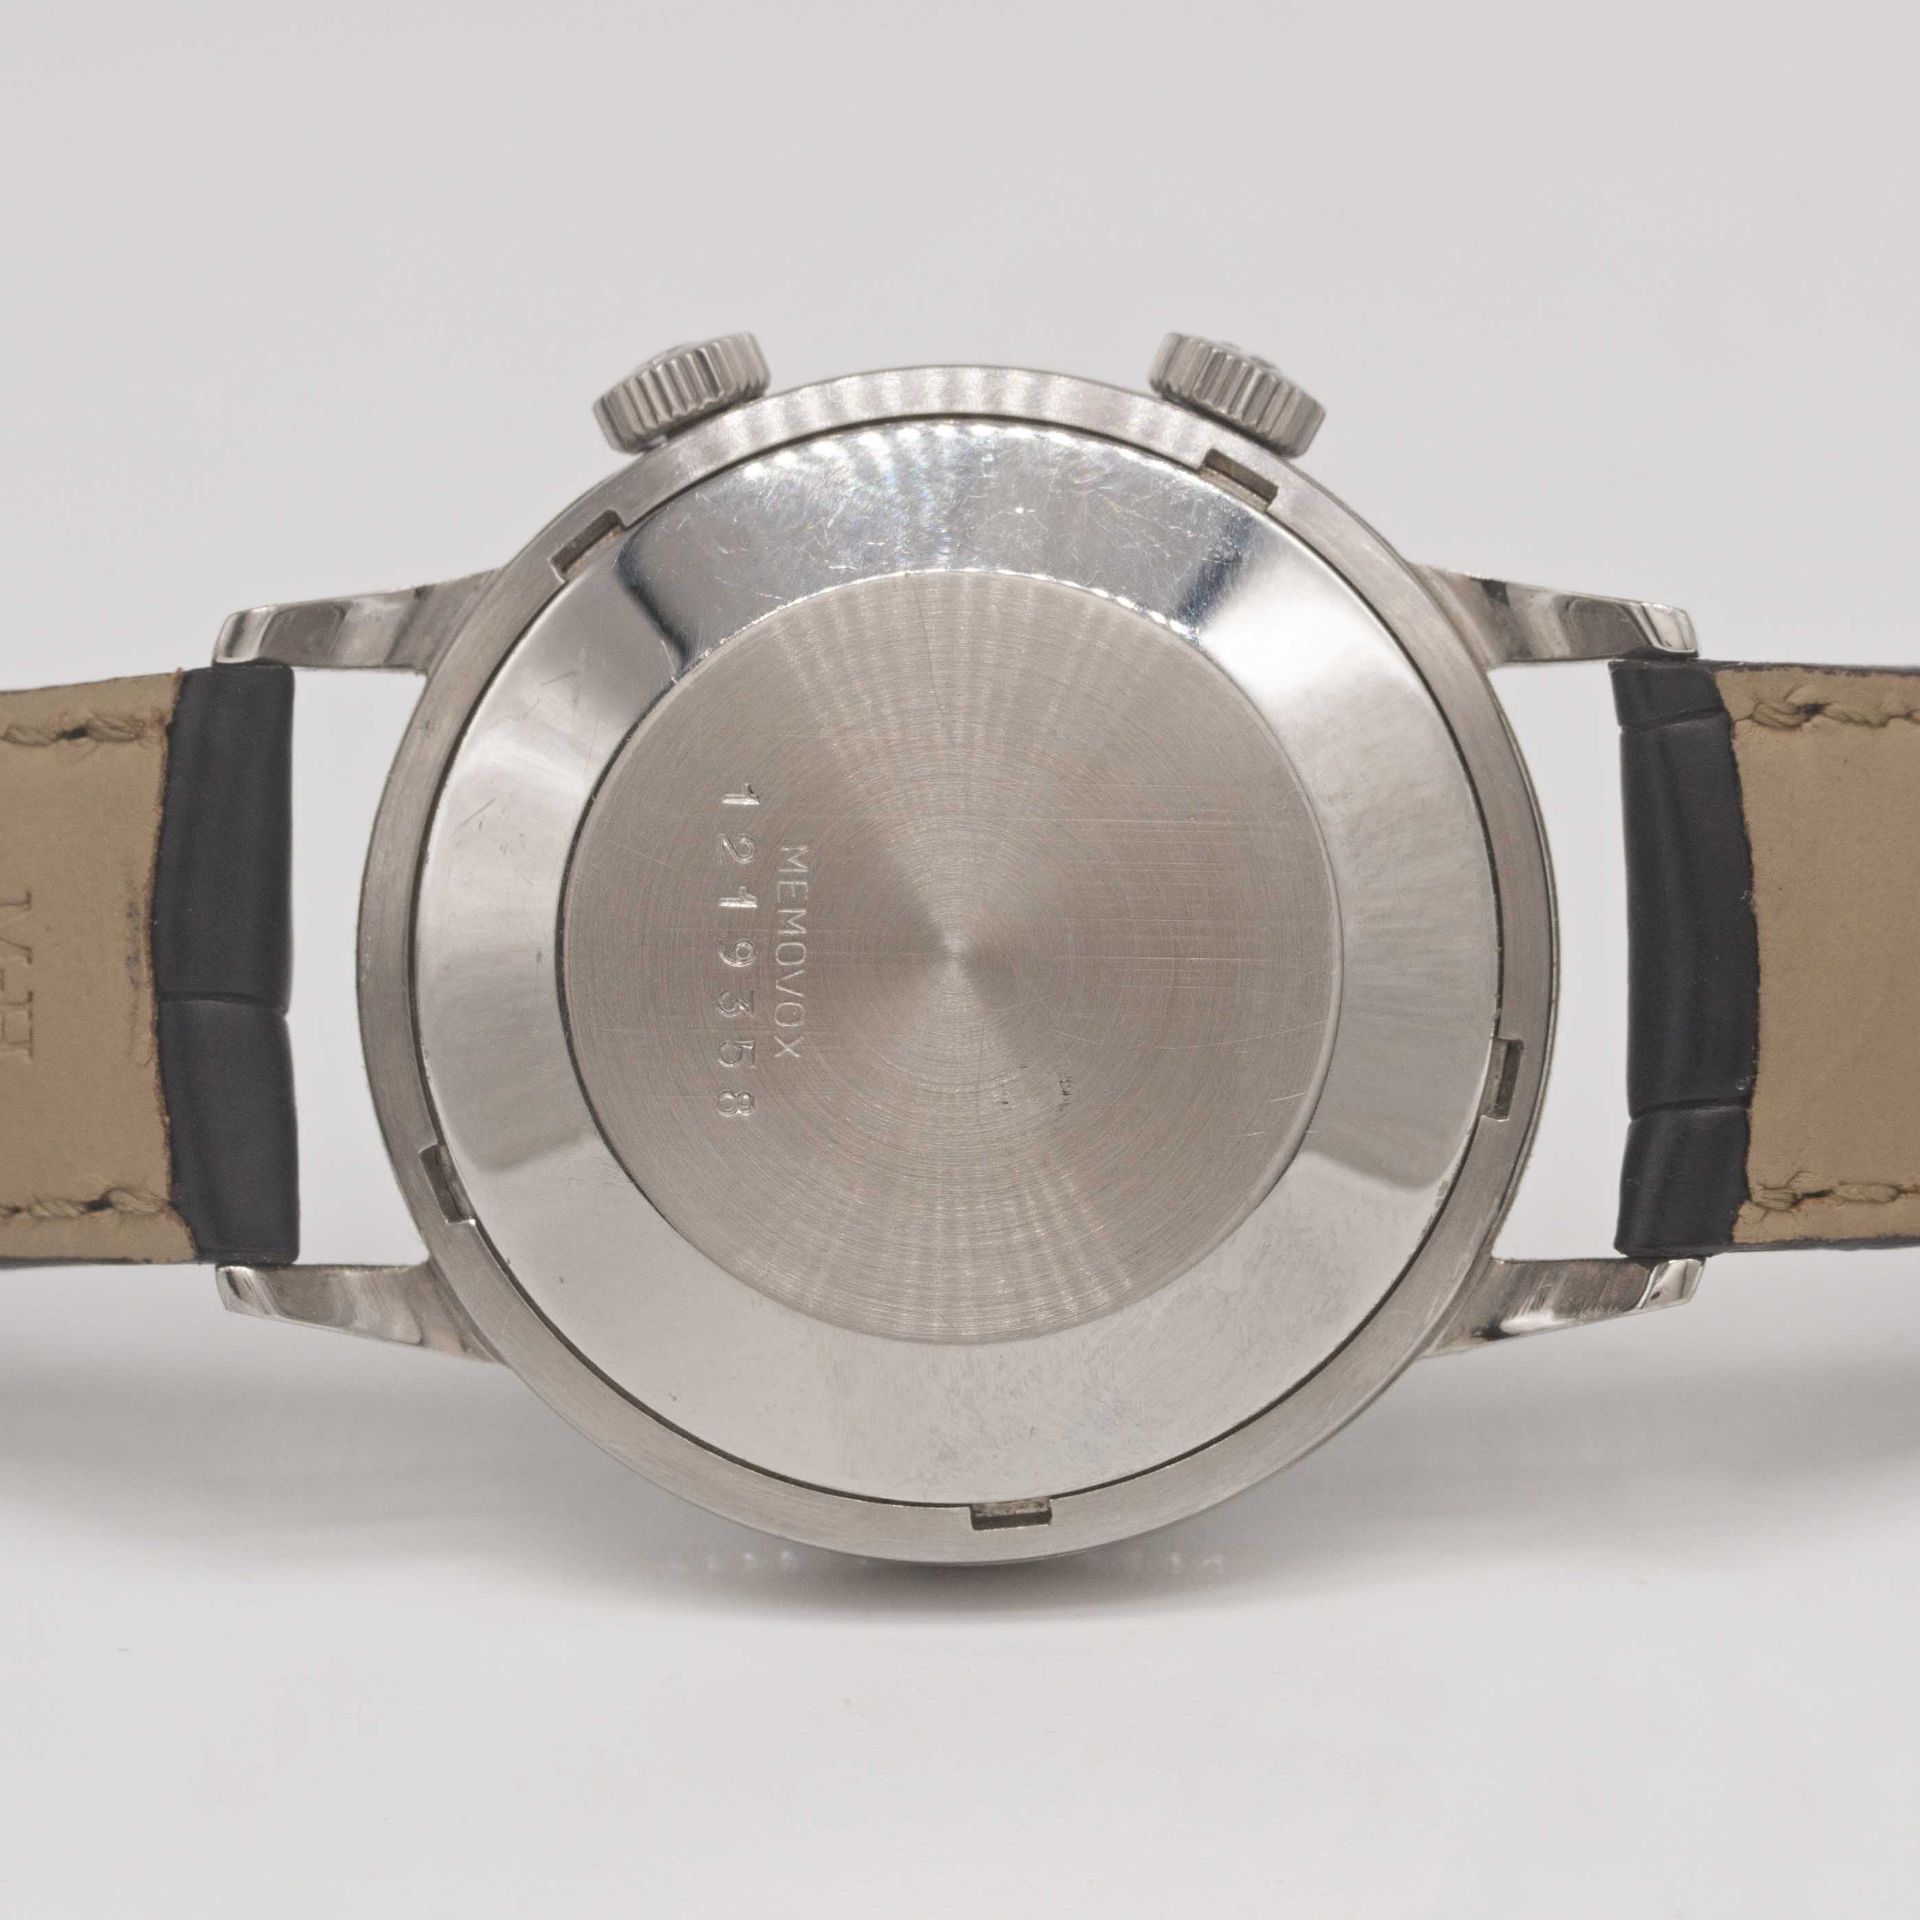 A GENTLEMAN'S STAINLESS STEEL JAEGER LECOULTRE MEMOVOX AUTOMATIC ALARM WRIST WATCH CIRCA 1960s, REF. - Image 7 of 9